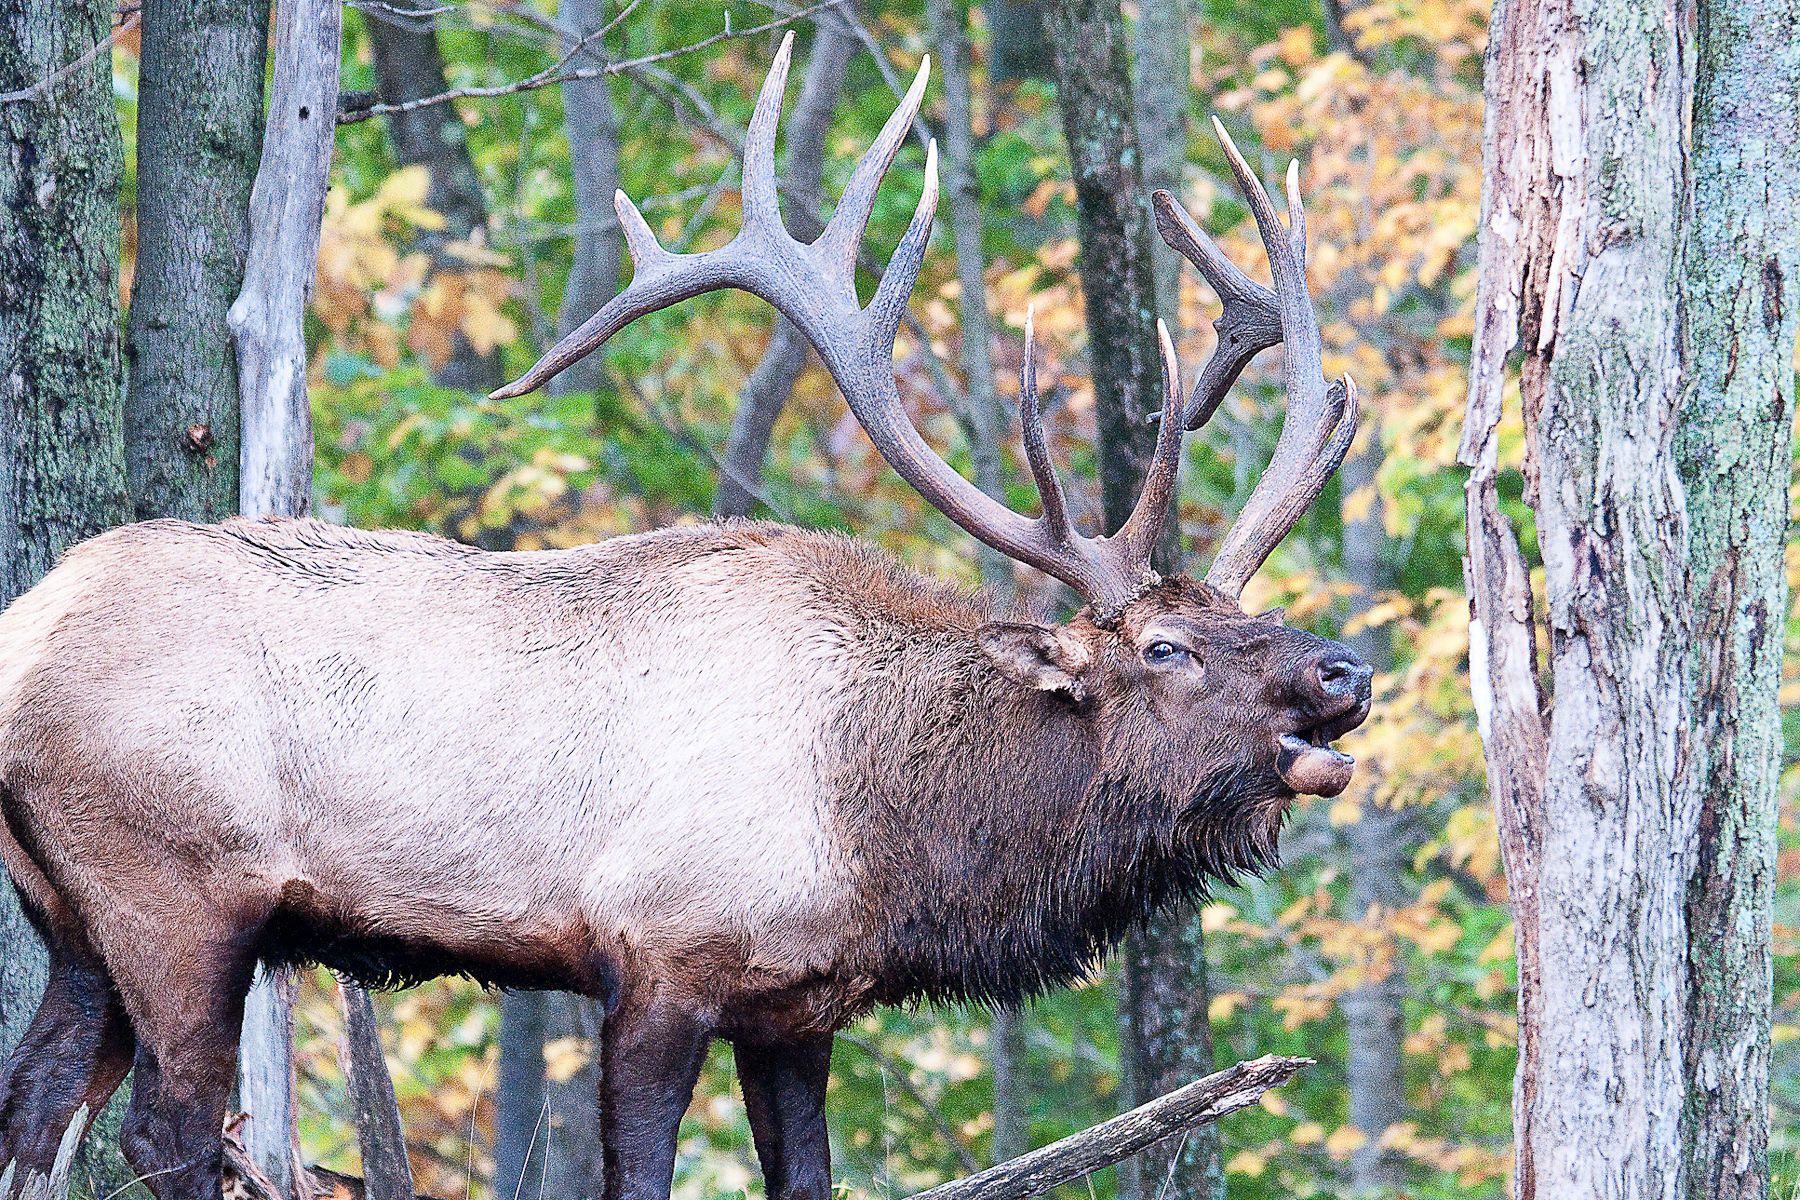 The reintroduction of wild elk to Pennsylvania has proven to be an economic boon for the state. Every year, elk tourism generates as much as $40 million. Photo: John McCullough via Flickr